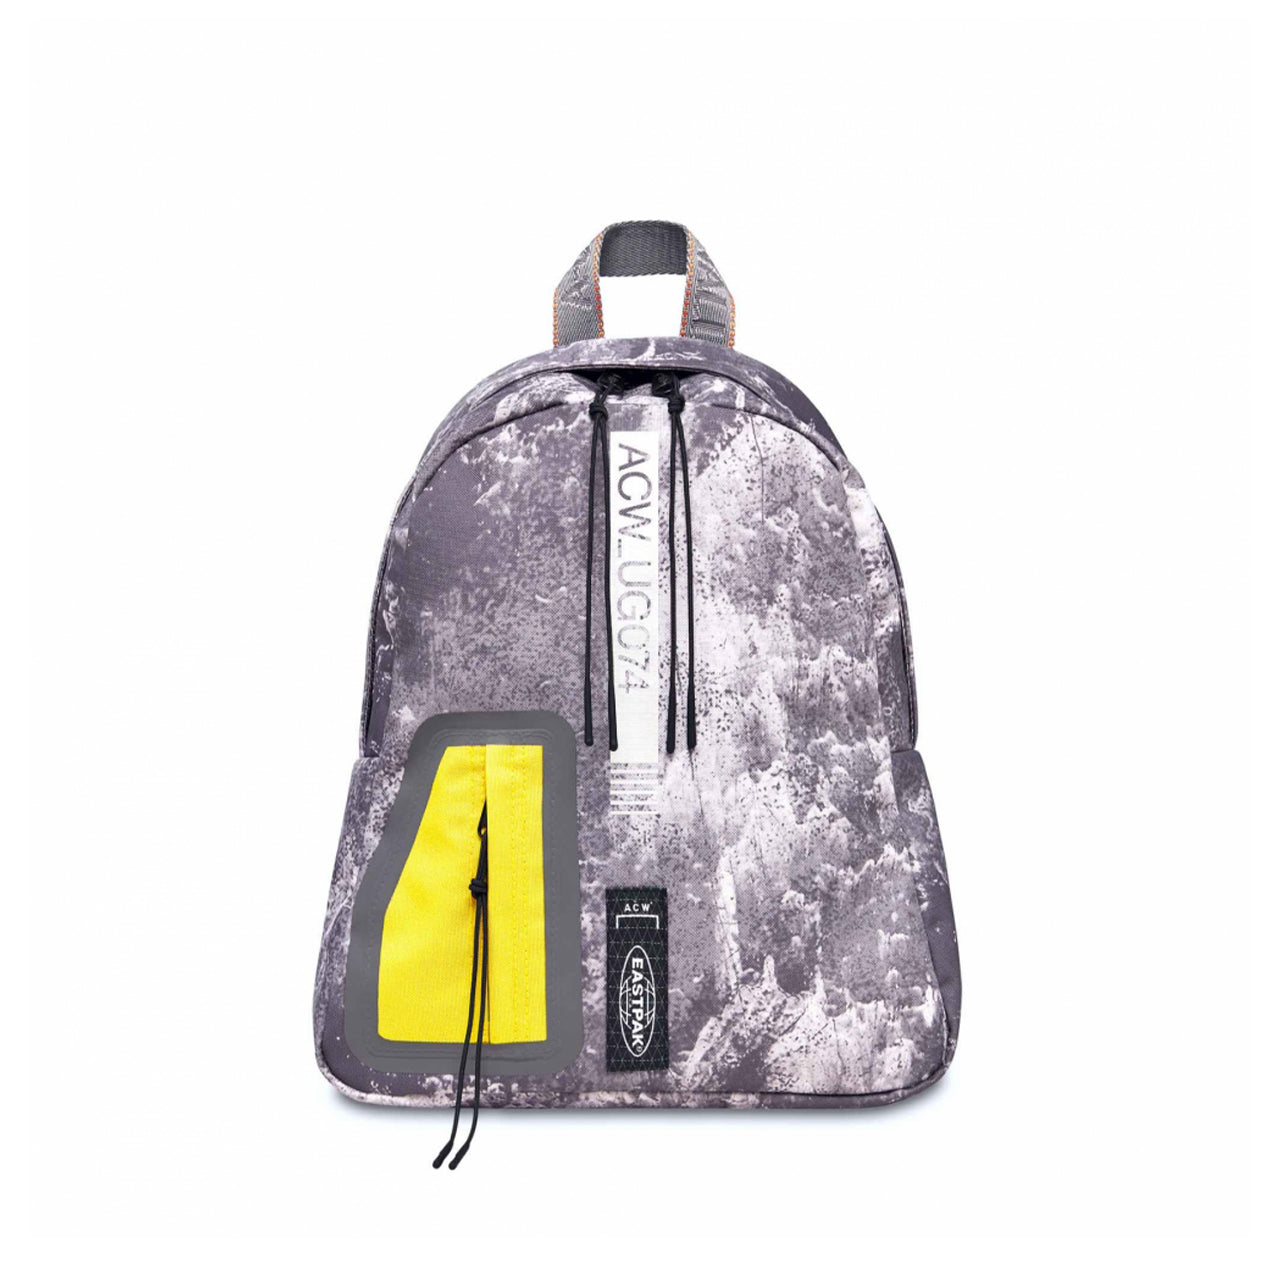 Score ontwerper vasthouden a-cold-wall* x eastpak compact backpack (grey / yellow) ACWUG074 - a.plus